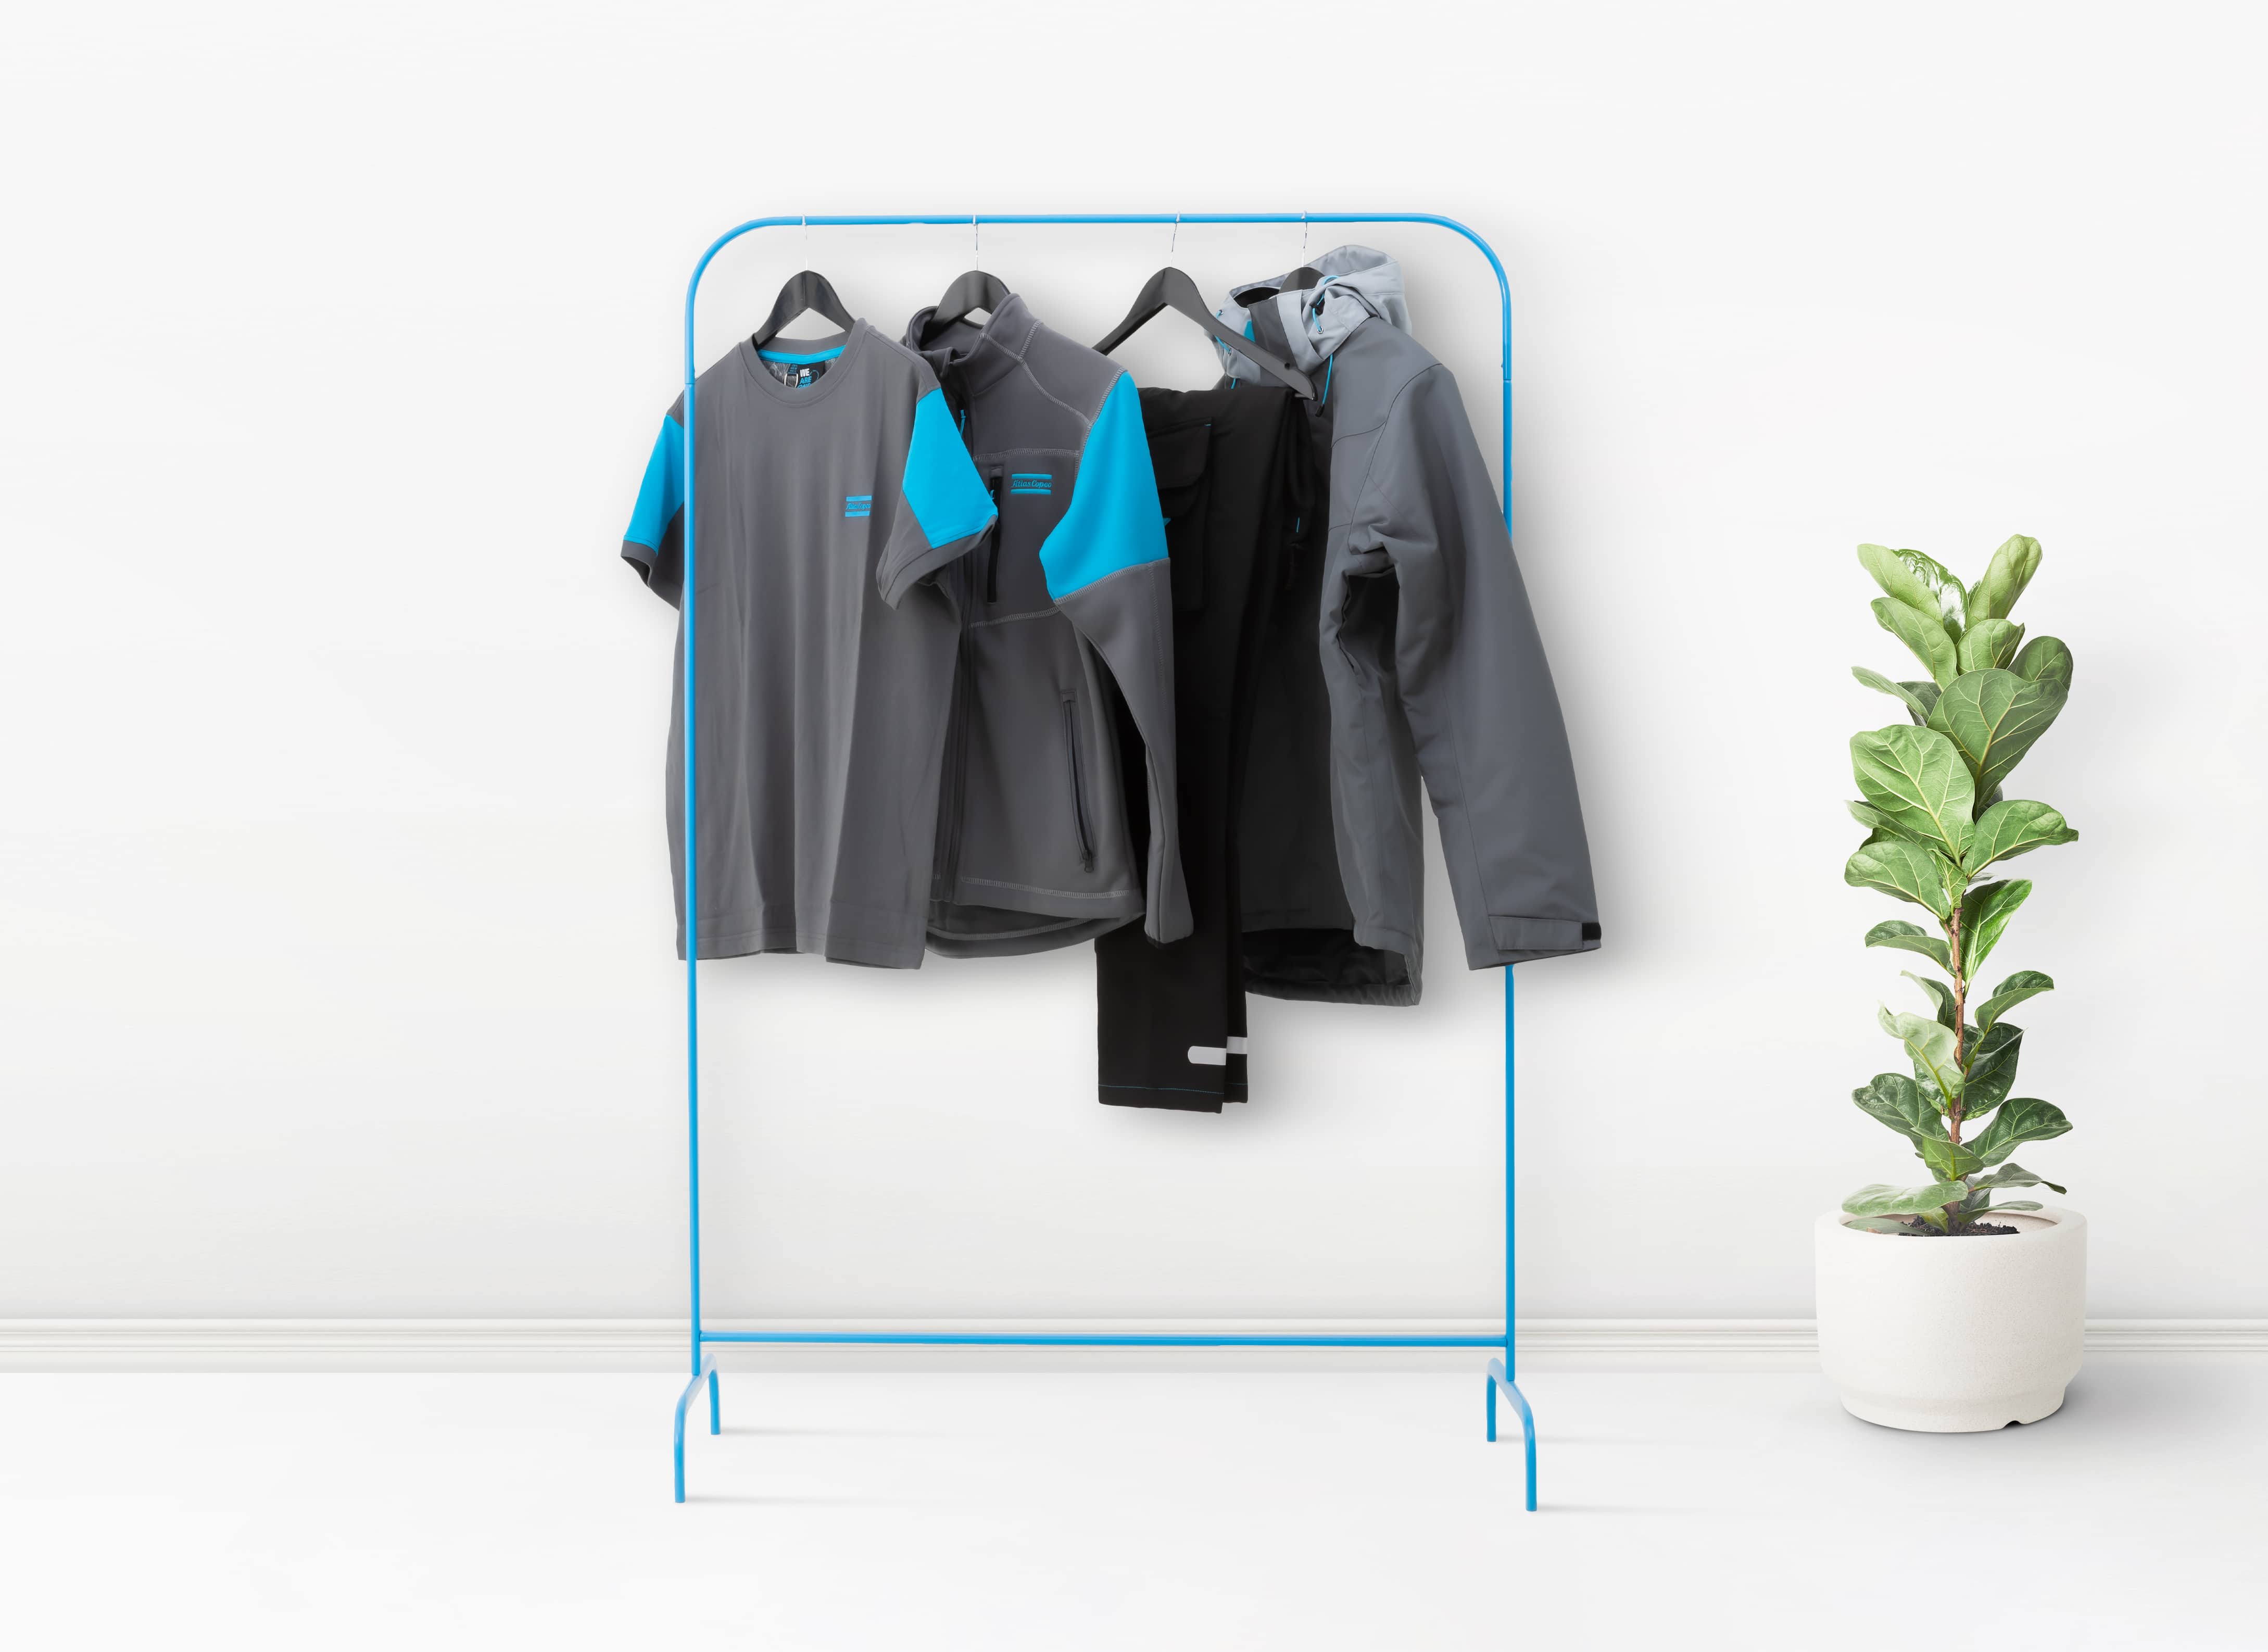 Meeting the wearer’s needs with the Atlas Copco We are ONE workwear ...